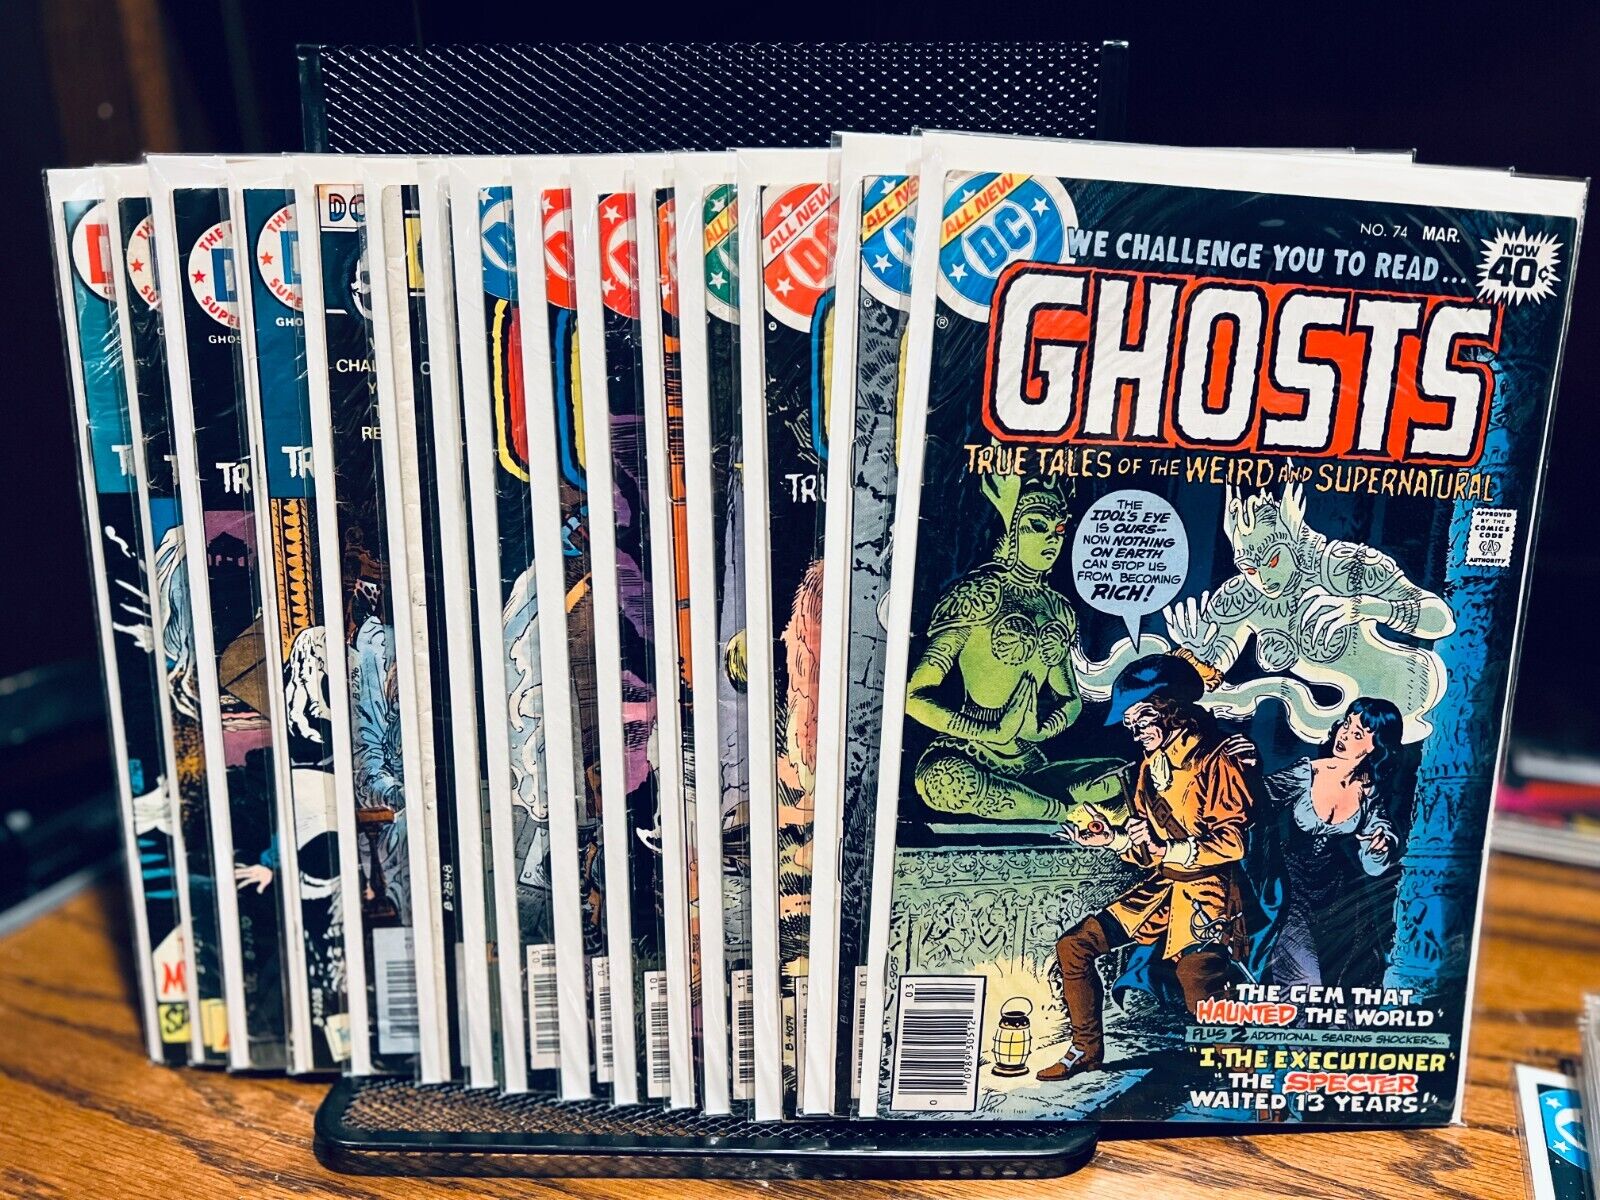 Lot DC Comics GHOSTS - 36 vintage US Comics from the Bronze Age era (1970-83) VG